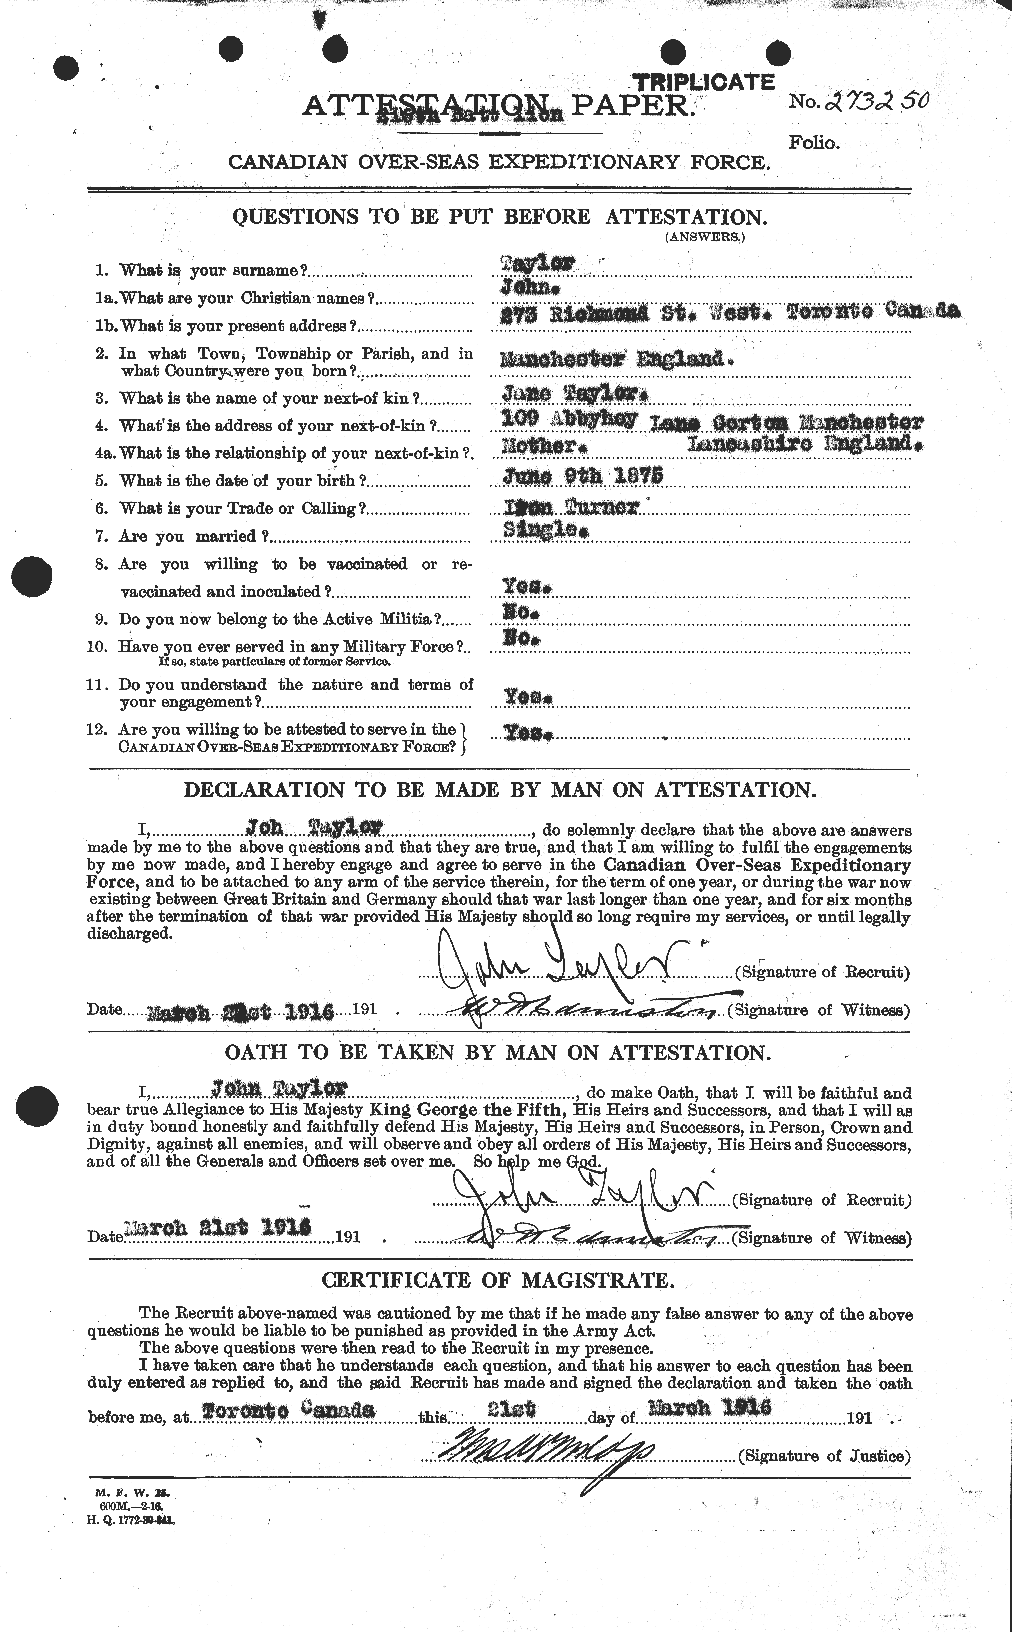 Personnel Records of the First World War - CEF 626987a